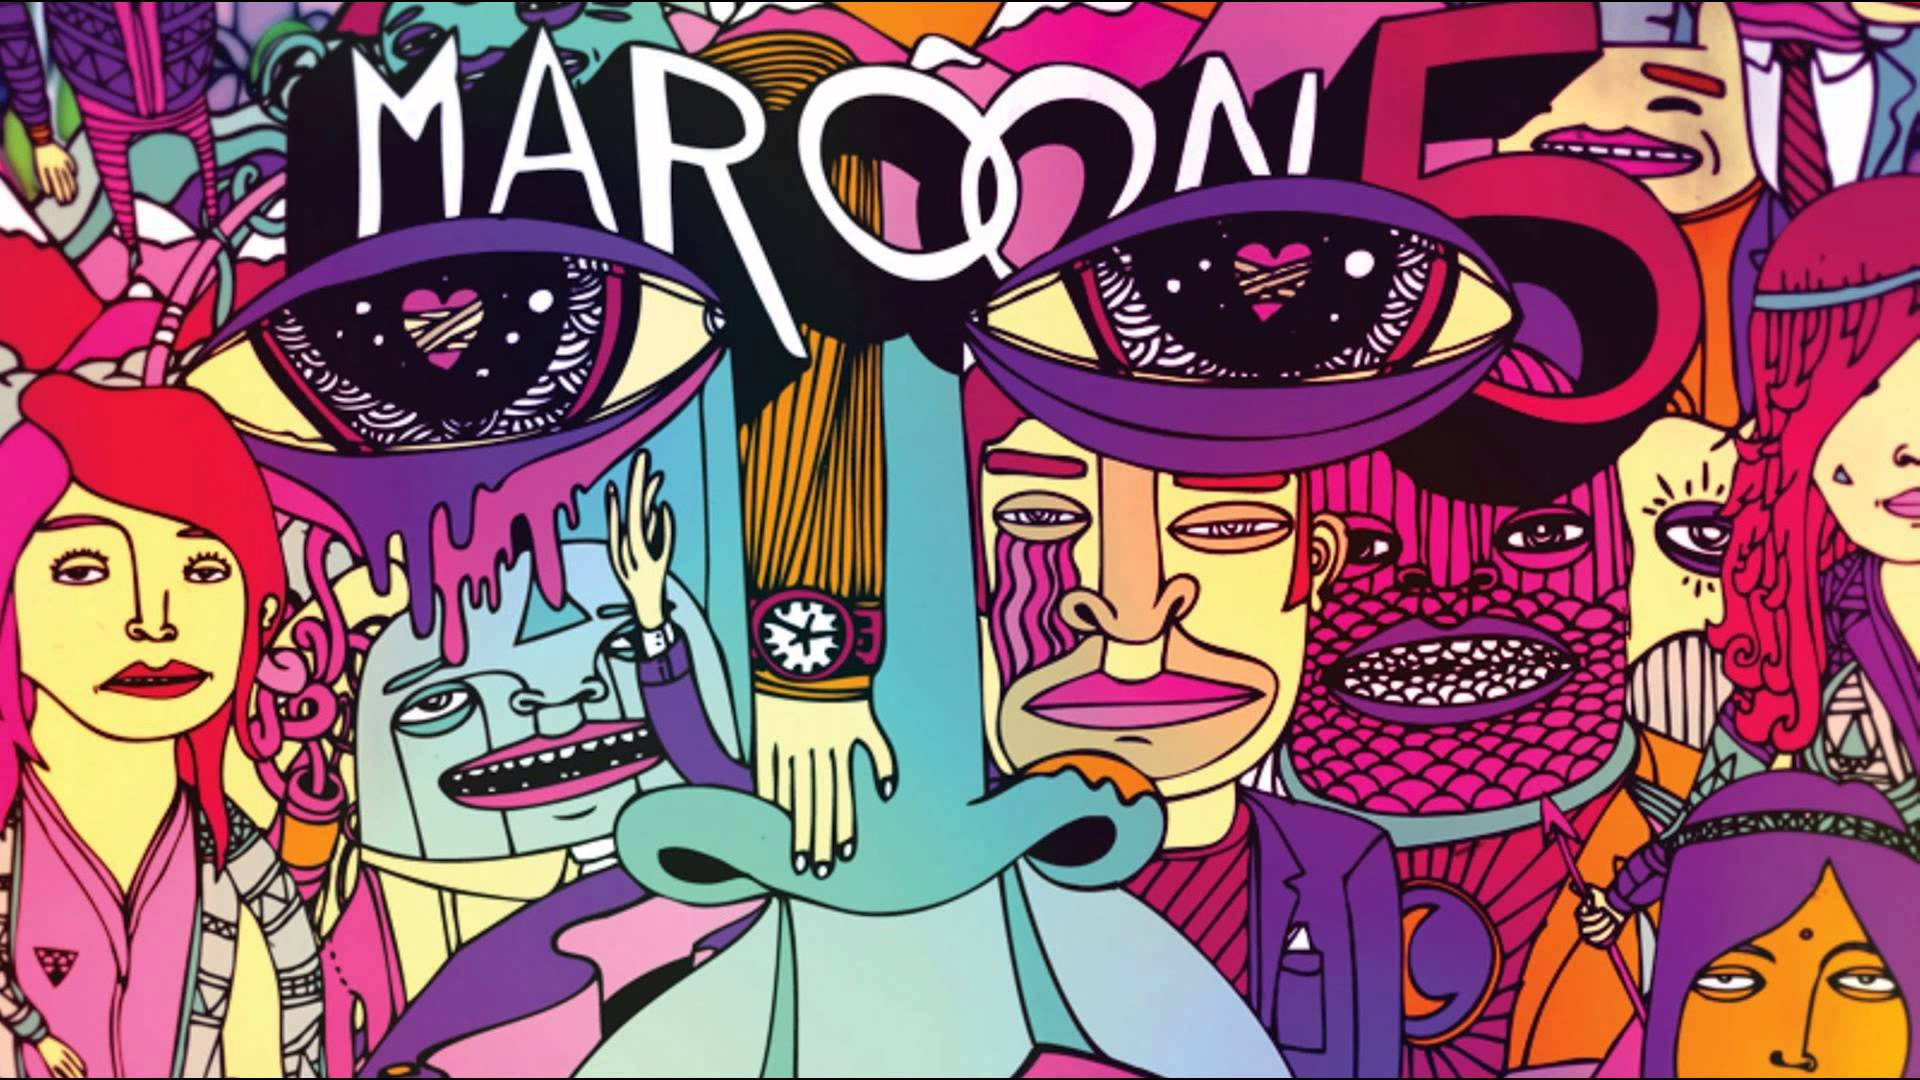 Free Maroon 5 Wallpaper Downloads, [100+] Maroon 5 Wallpapers for FREE |  